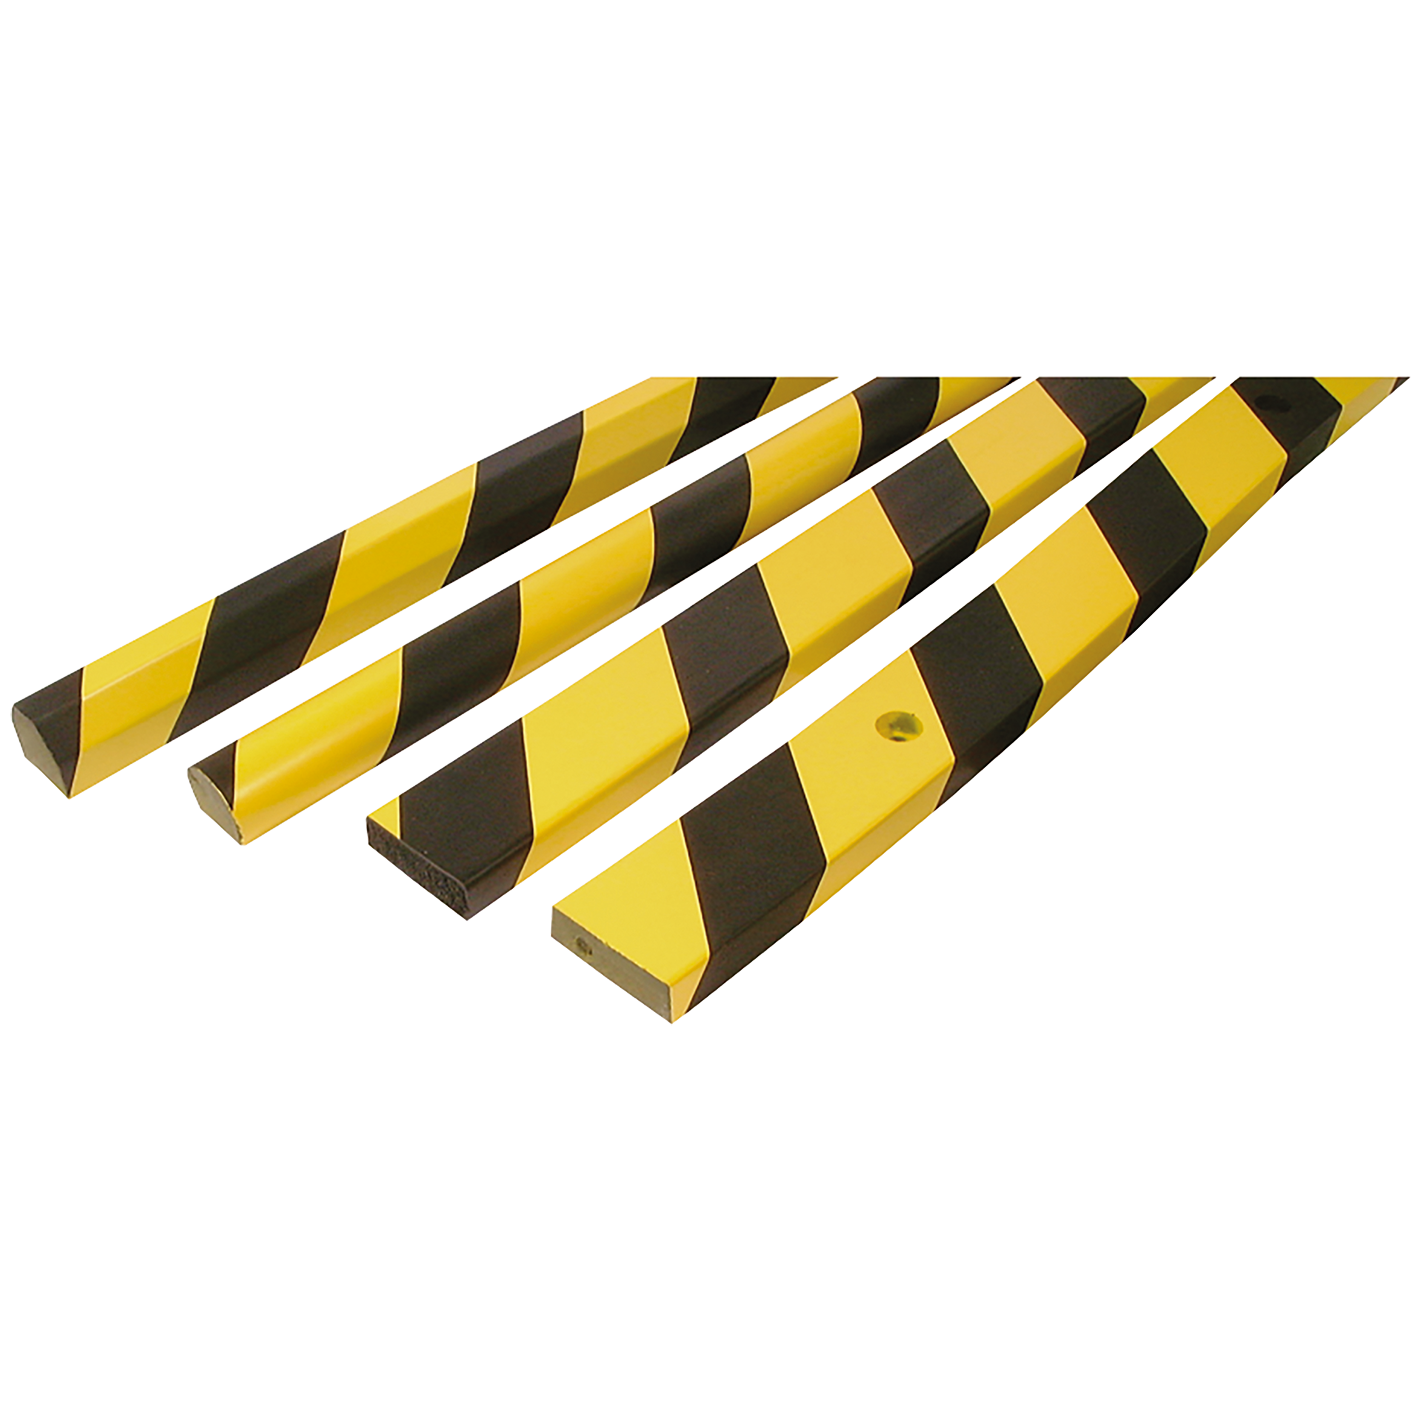 RECTANGLE YELLOW/BLK DRILED 3 HOLE X 1MT